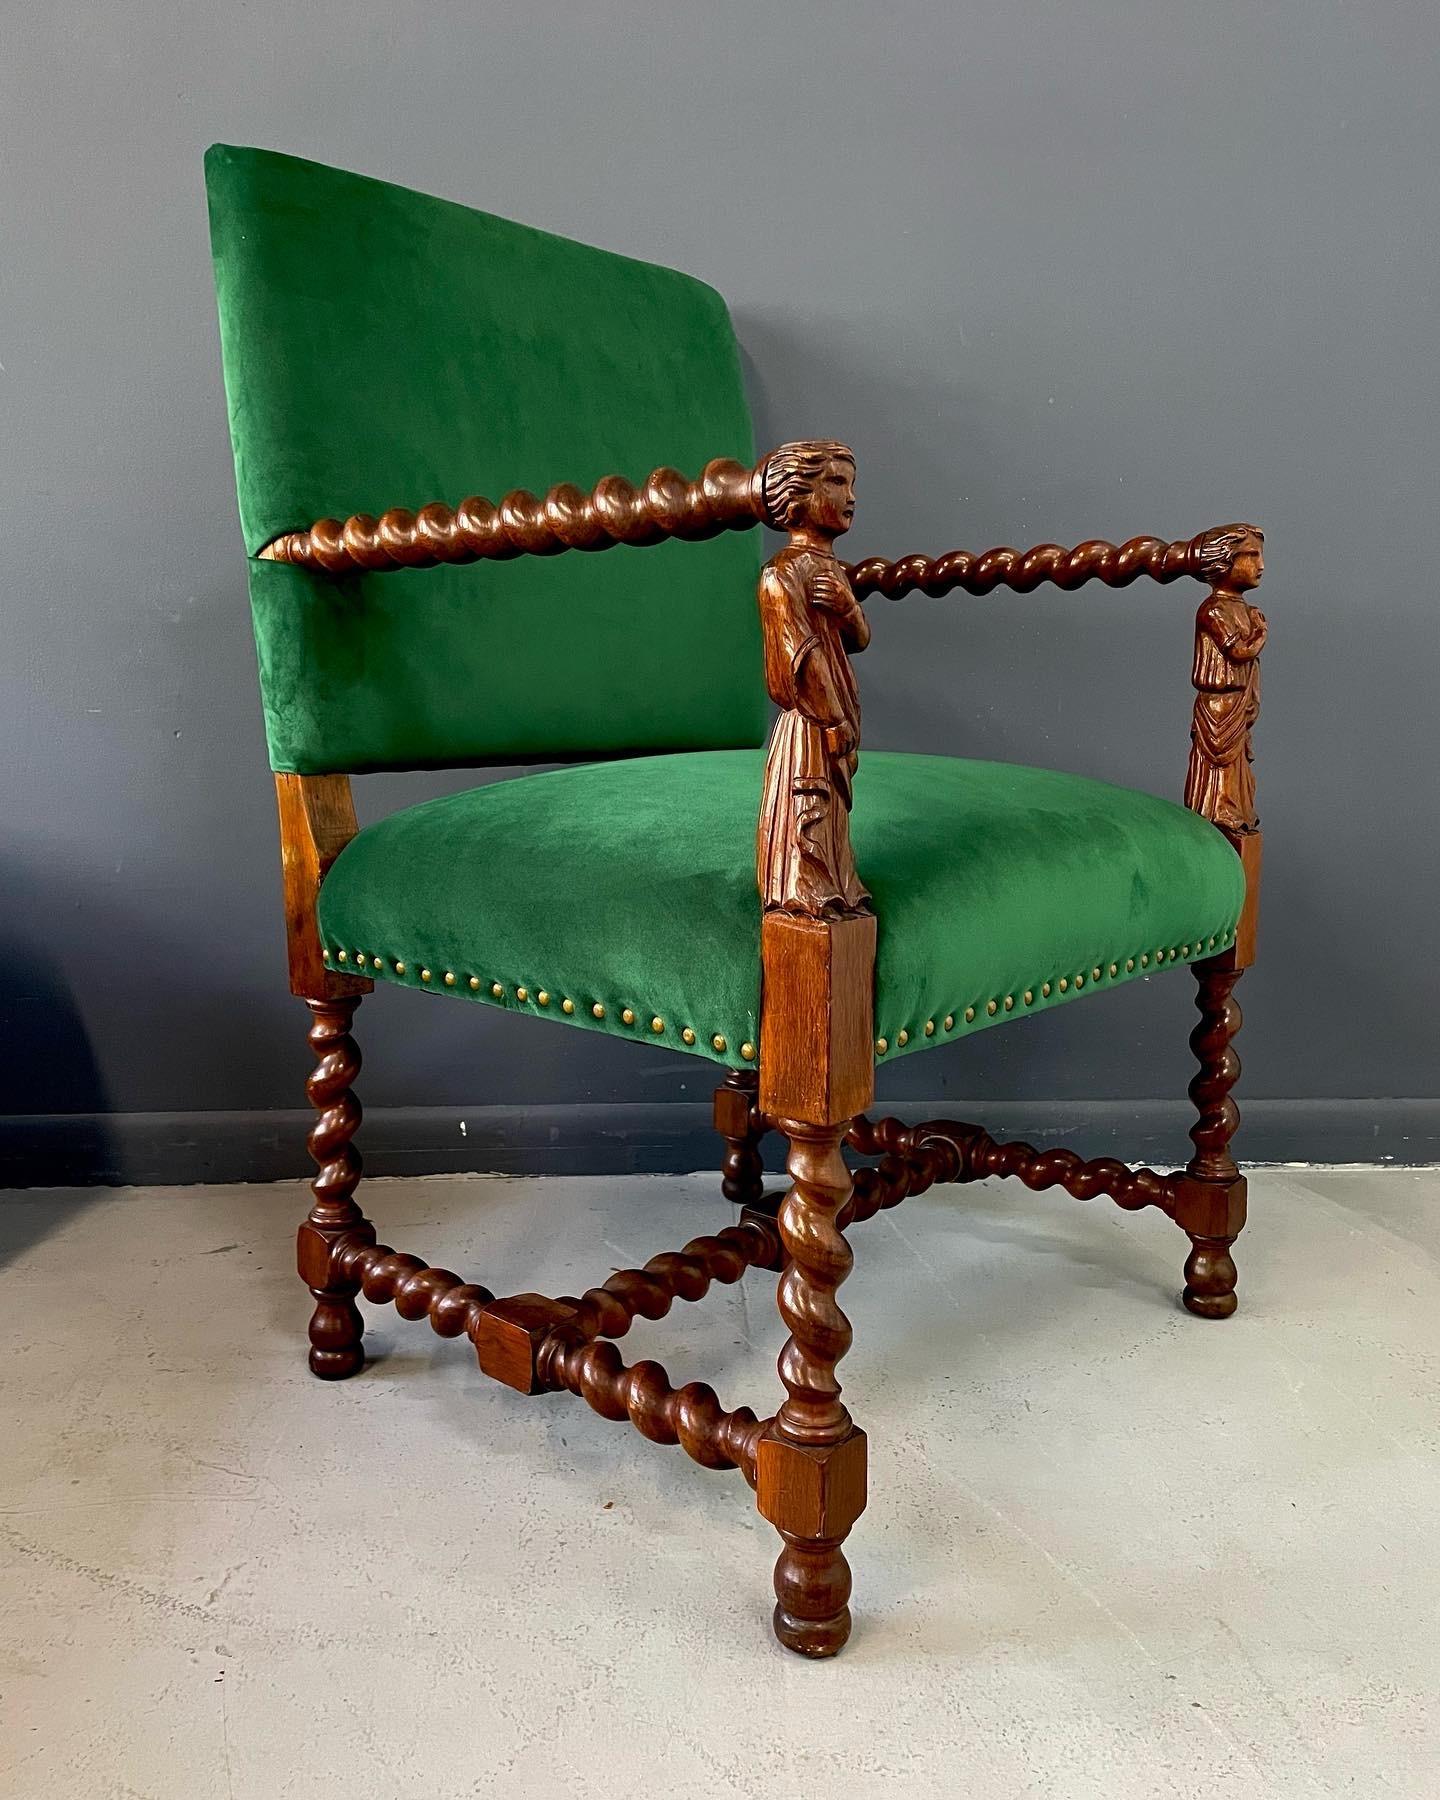 Wonderfully regal armchair constructed of oak with a barley twist design and two carved figures on the arm front. This chair has been carefully restored and reupholstered with a brilliant emerald green velvet.